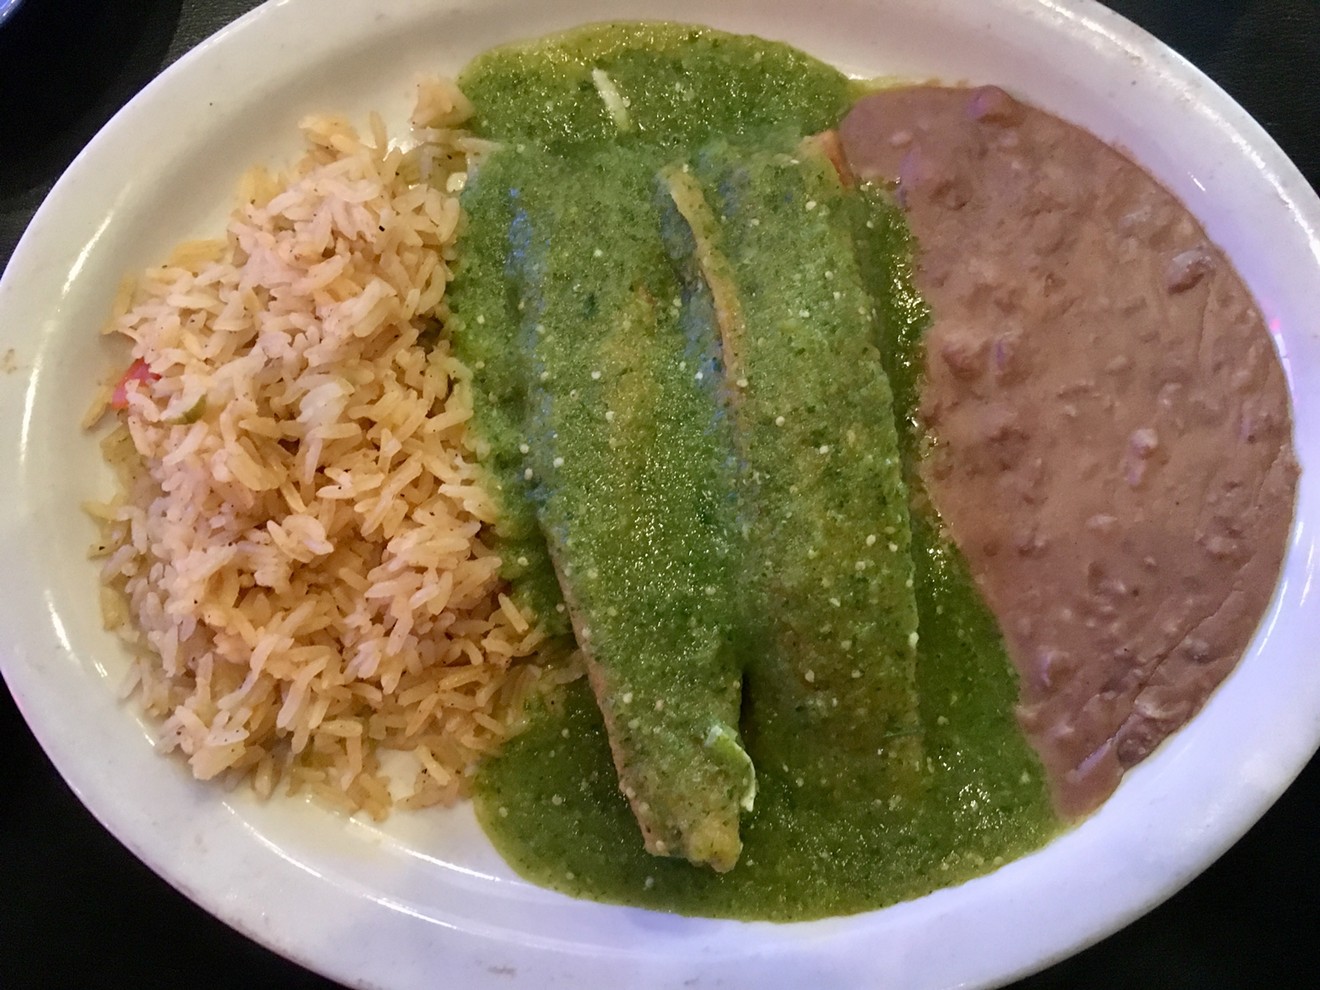 The tamales, made from a longtime recipe from Pedro Rojas' family, are served under electric-green salsa.